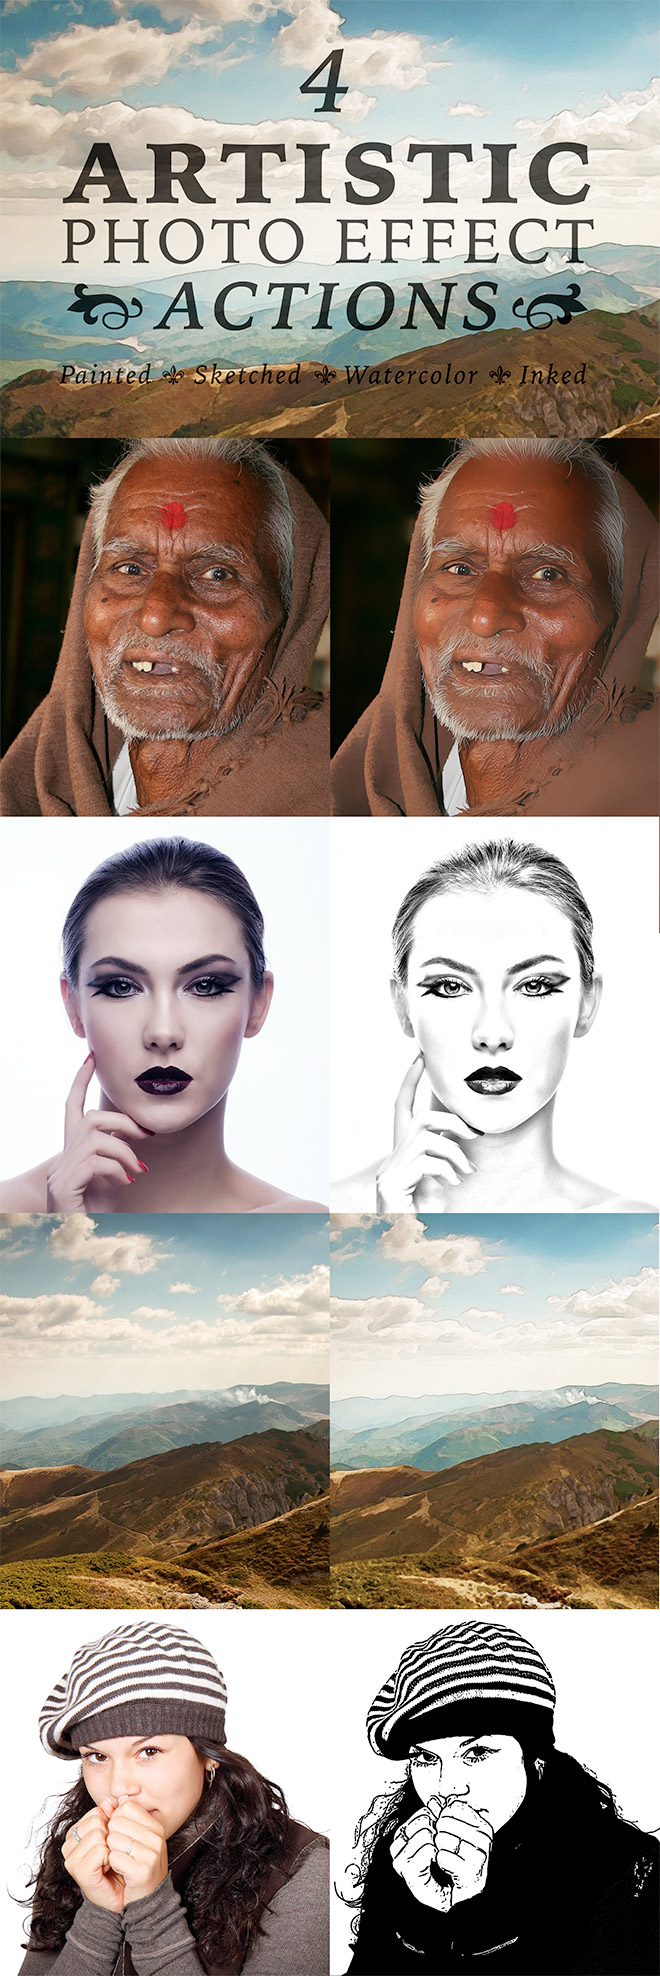 Artistic Photo Effect Actions